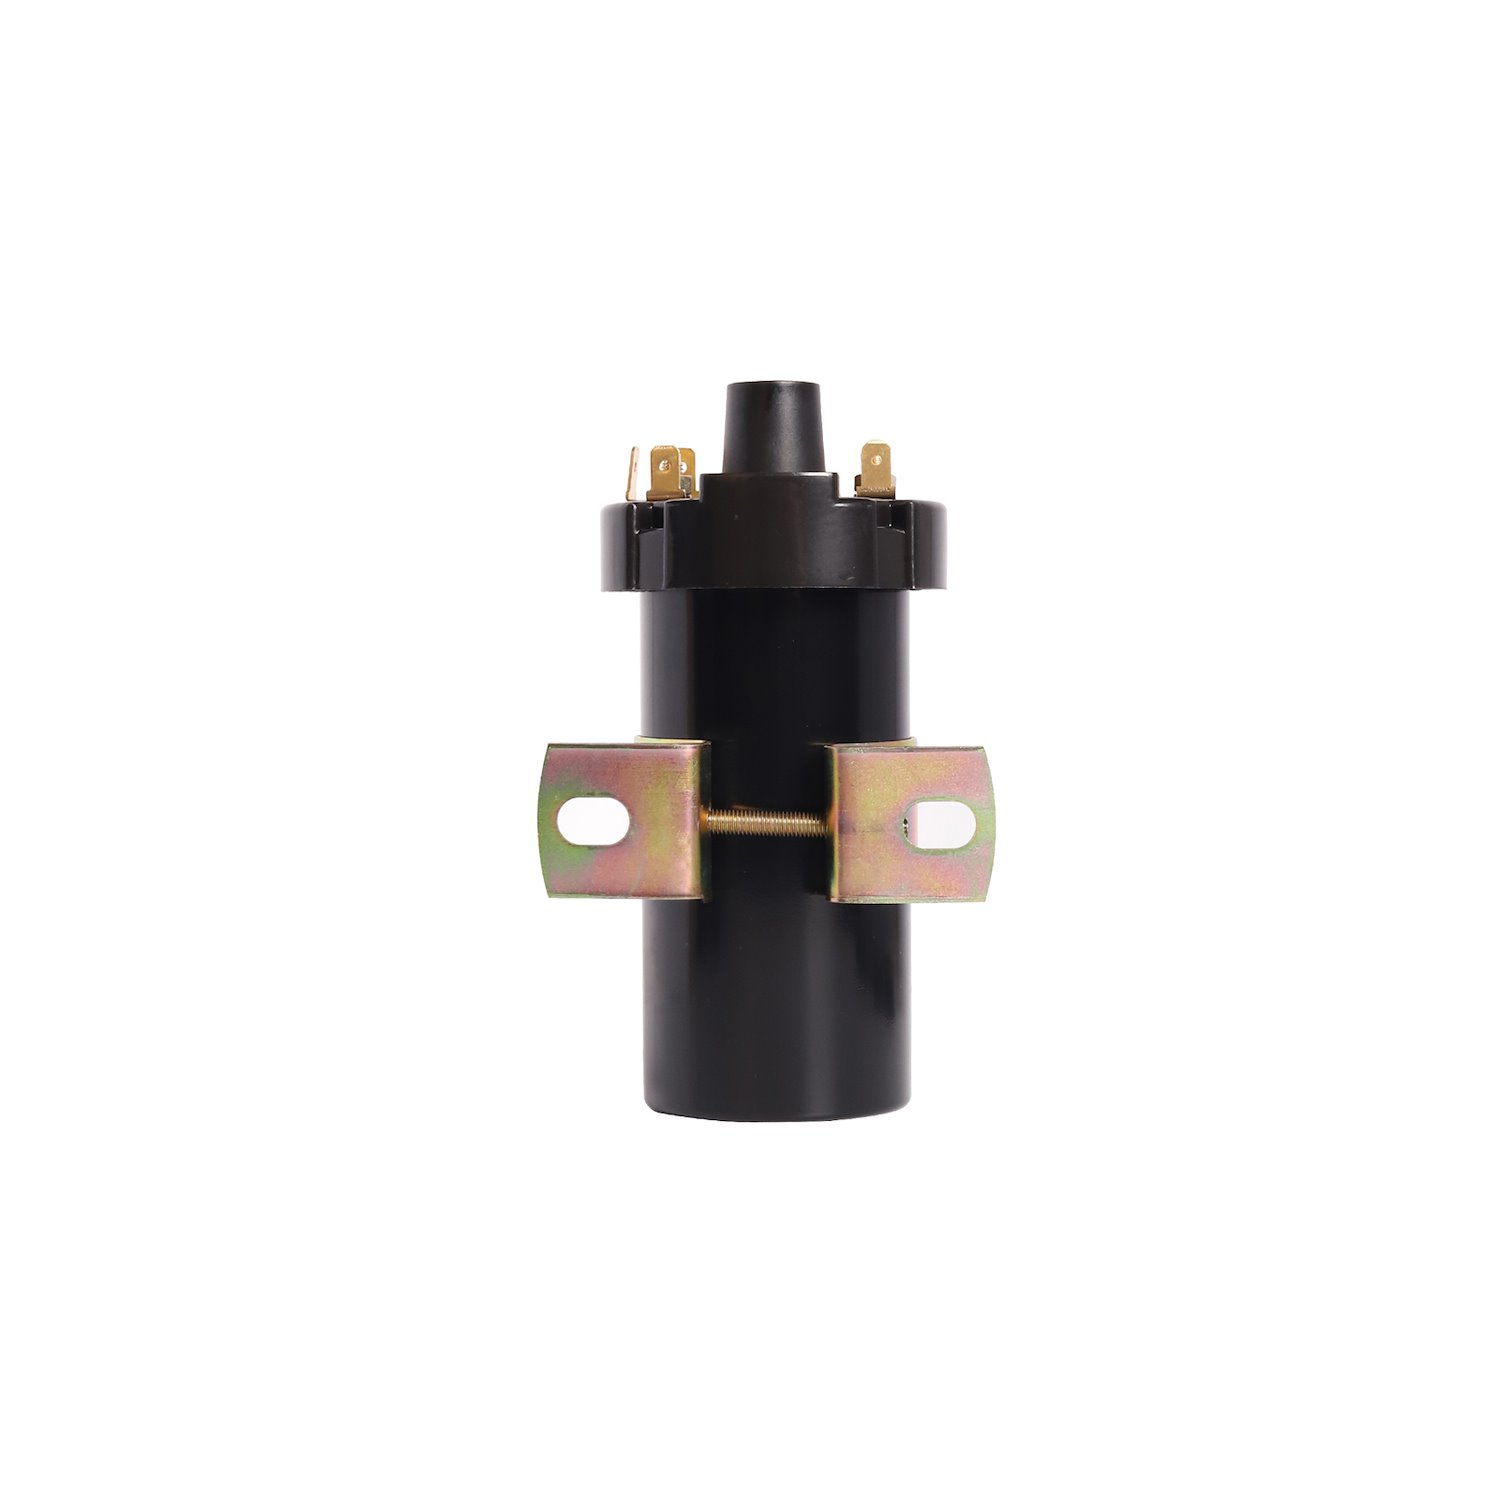 OE Replacement Ignition Coil for Volkswagen 1985-1990 Jetta, 1985-1991 Golf, 1991-1993 Passat L4 1.8L